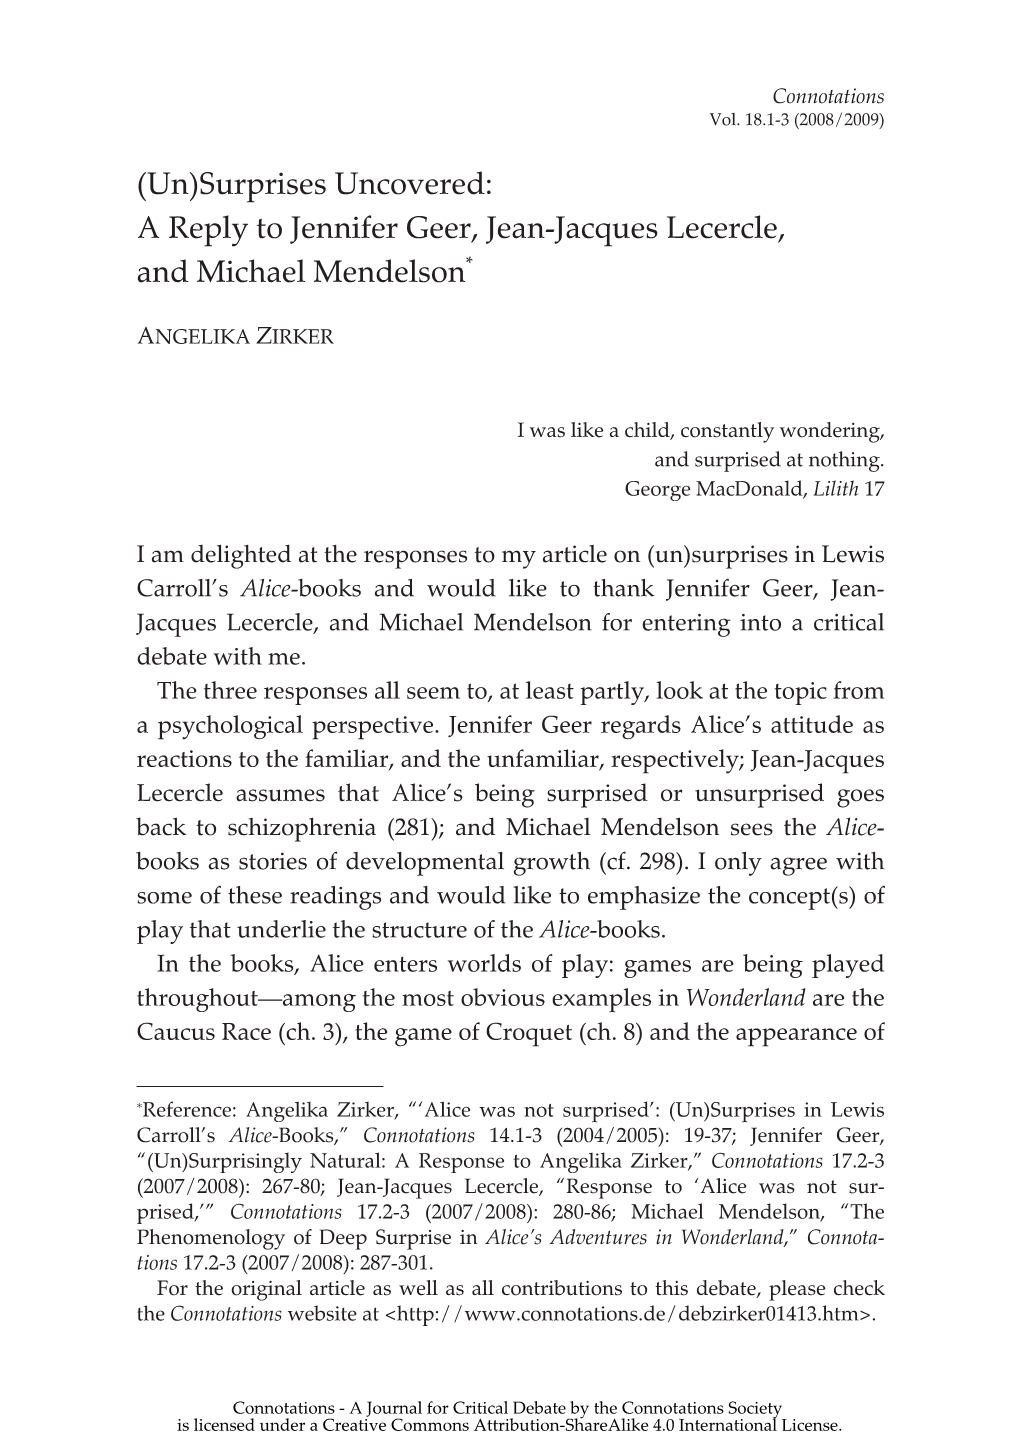 (Un)Surprises Uncovered: a Reply to Jennifer Geer, Jean-Jacques Lecercle, and Michael Mendelson*